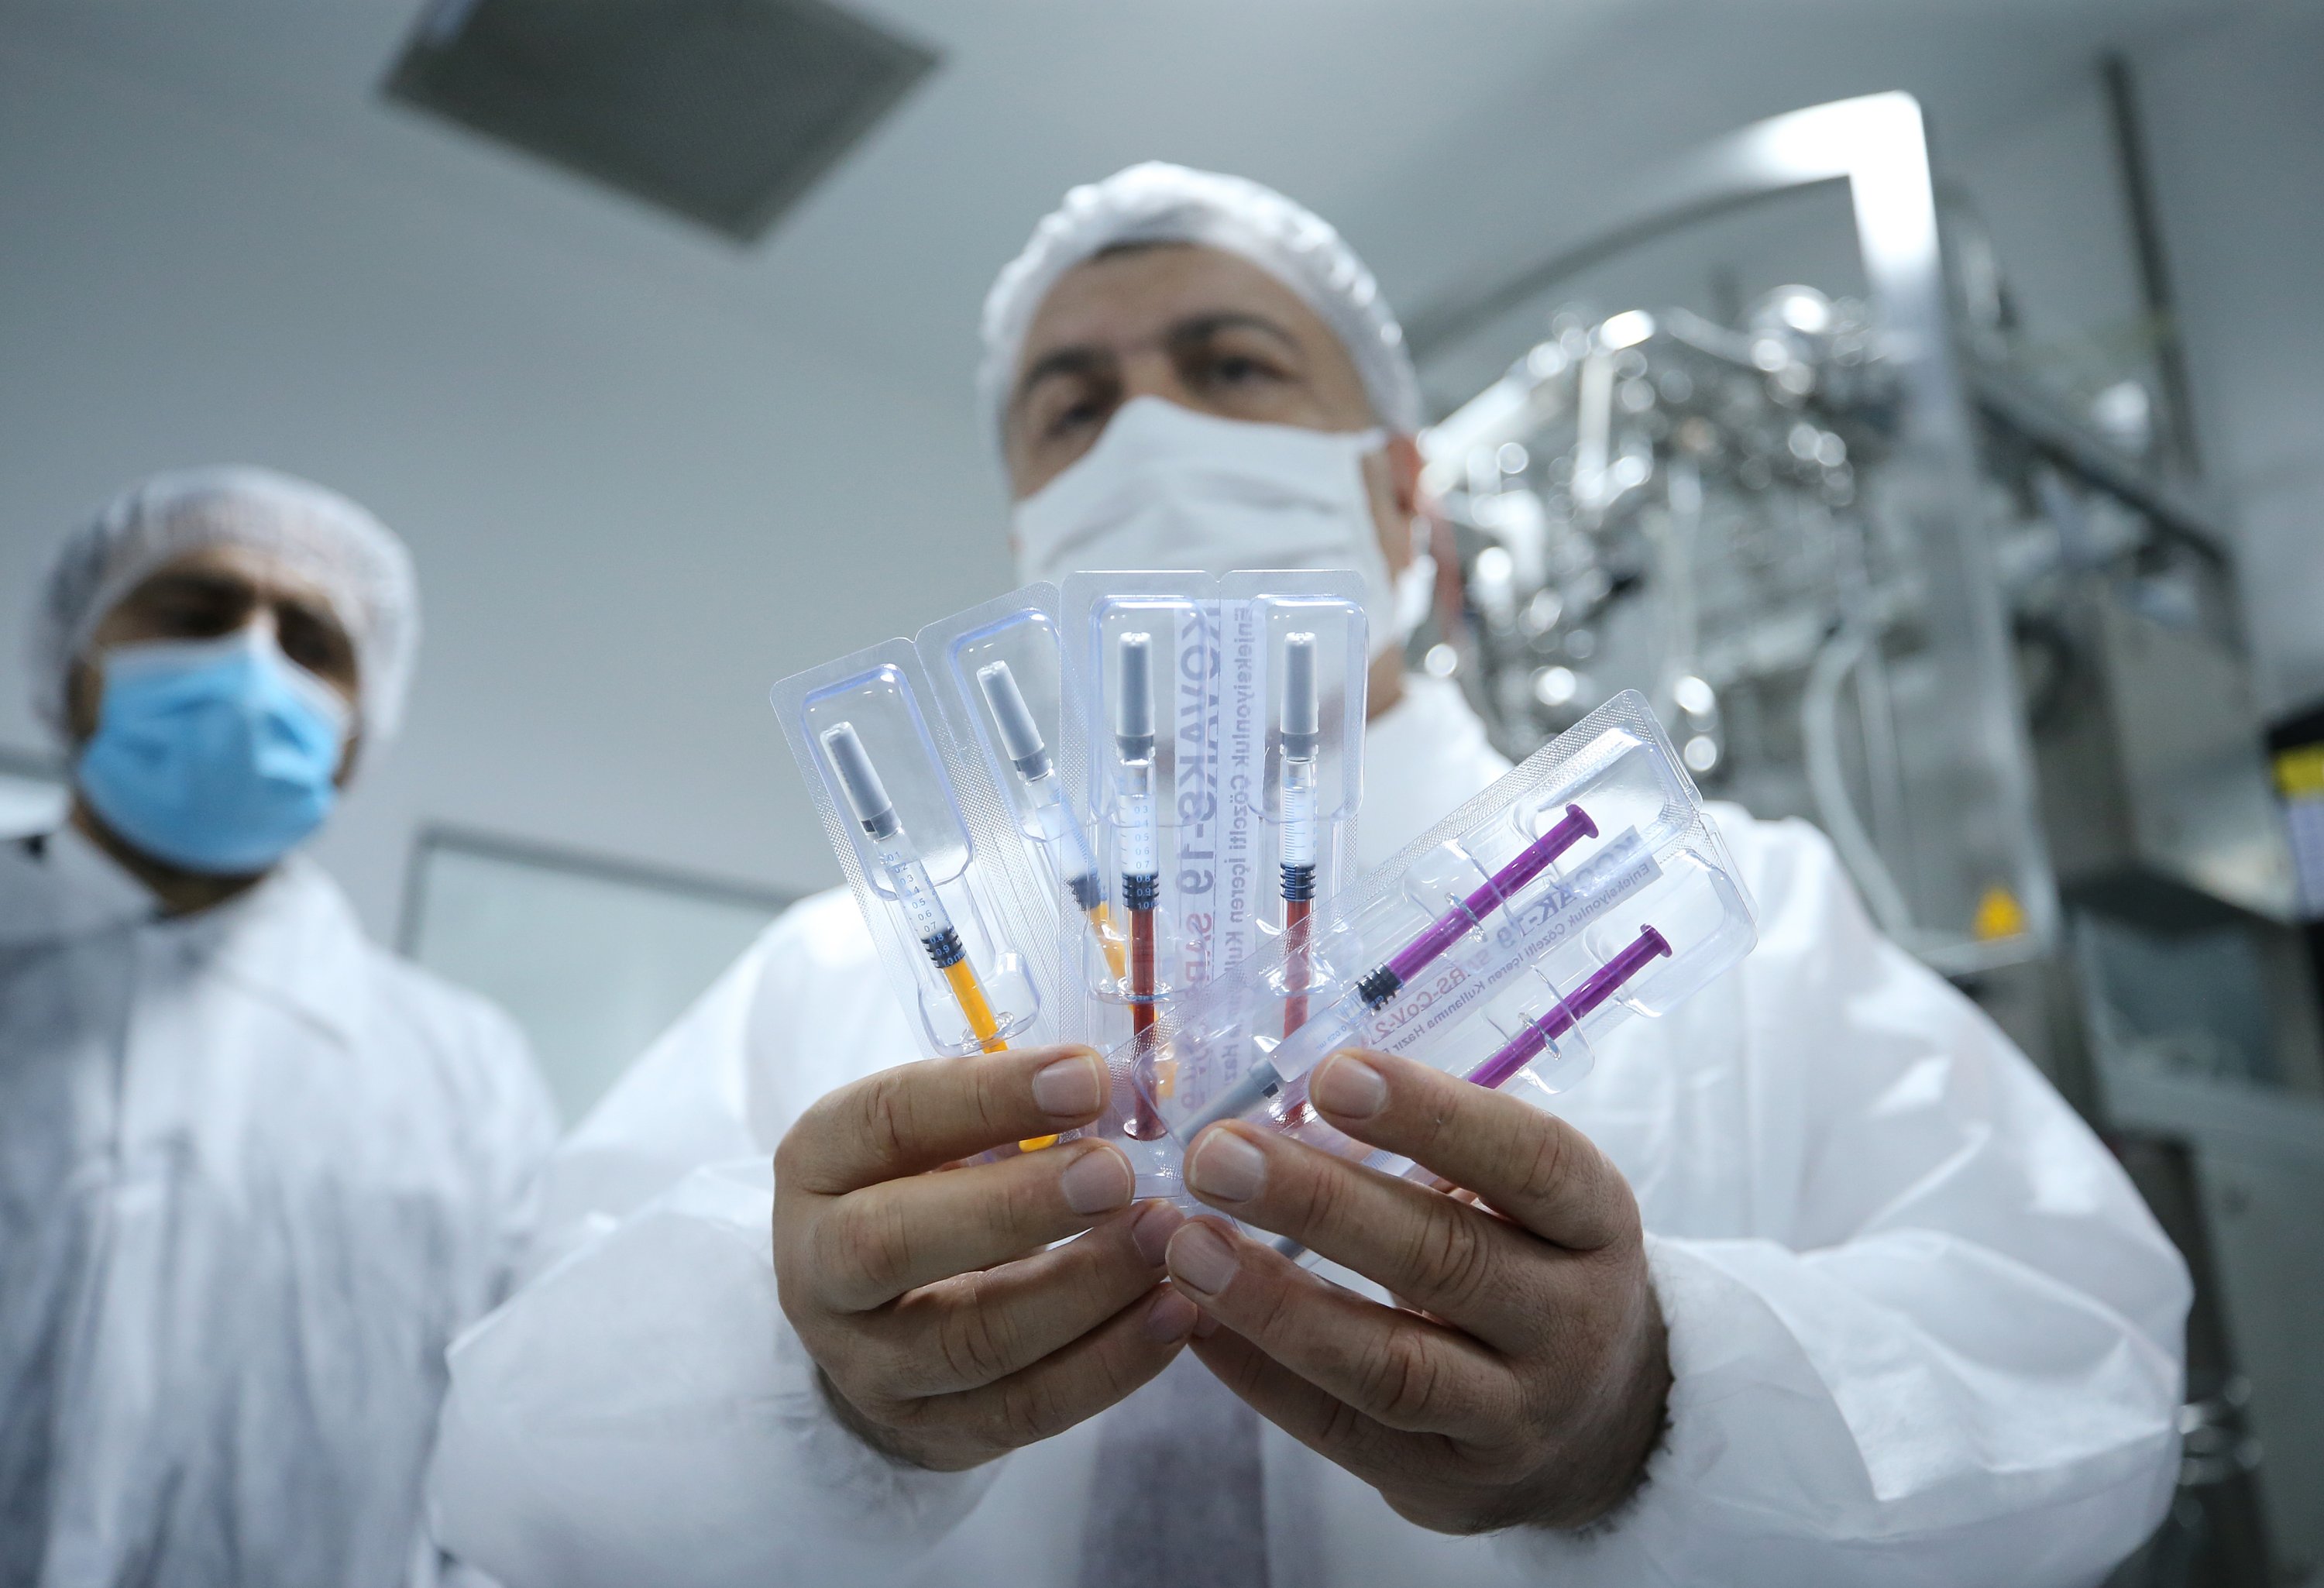 Human trials of Turkish-made COVID-19 vaccines to start in late October |  Daily Sabah